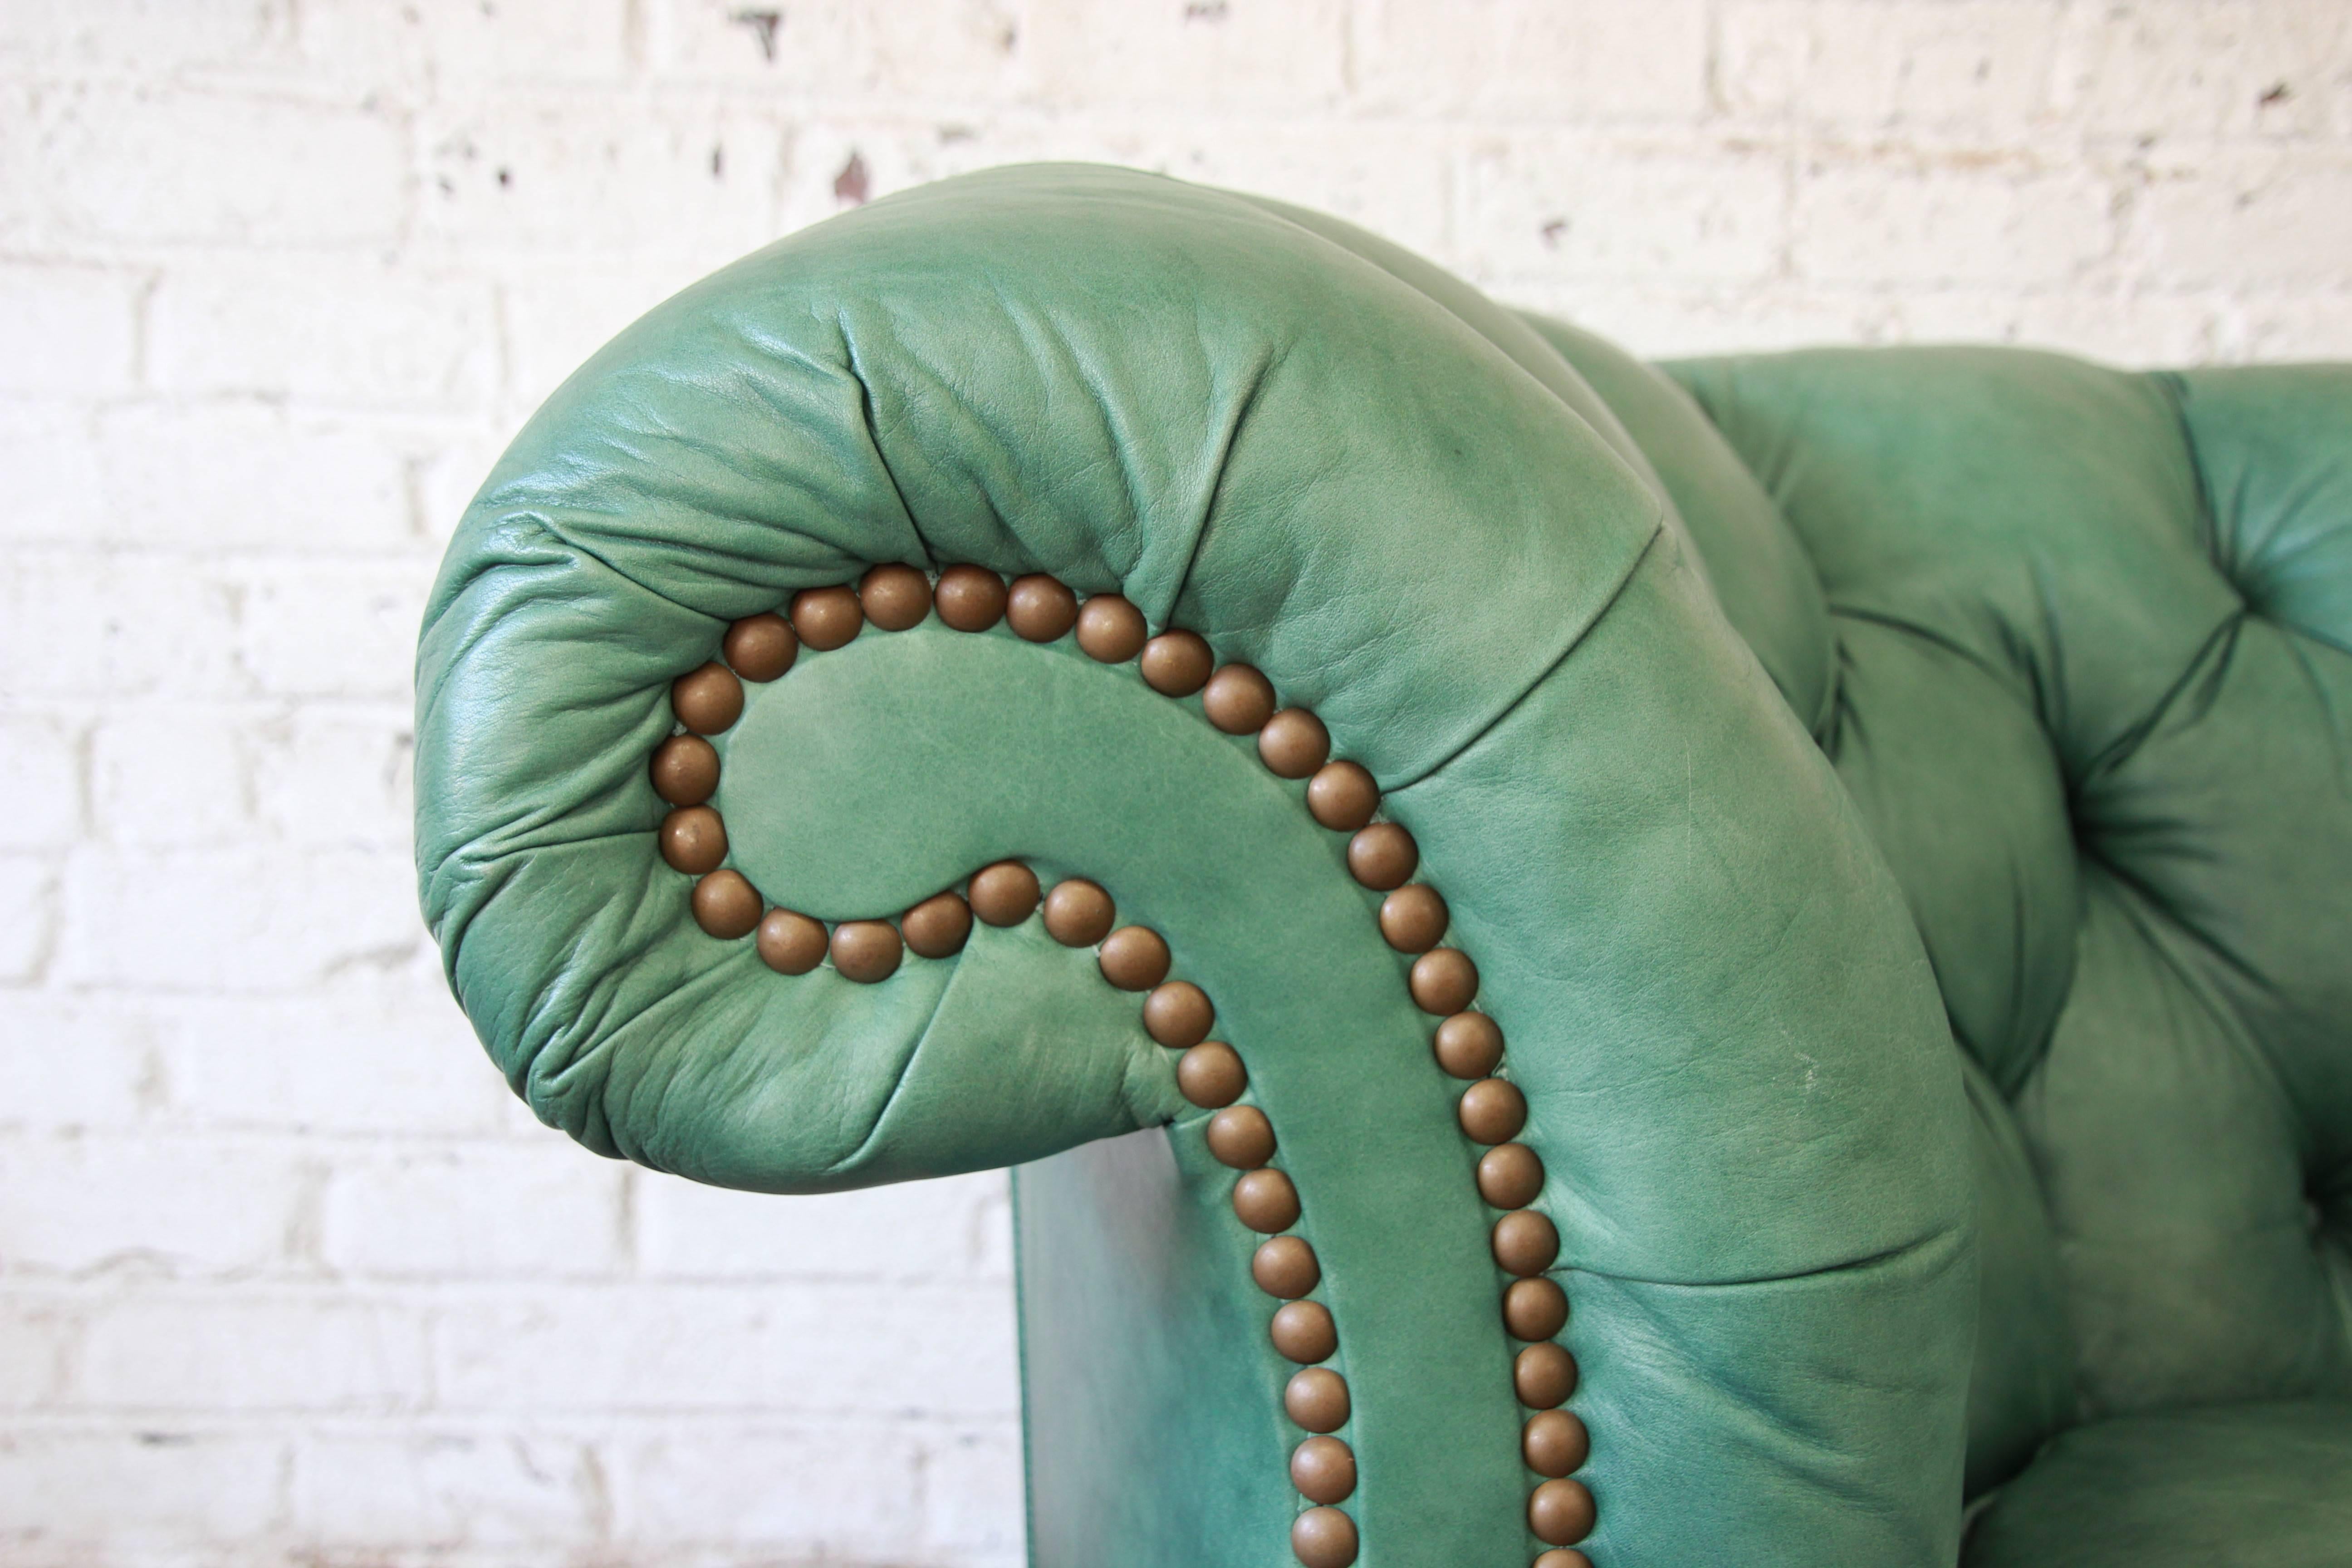 Brass Vintage Teal Tufted Leather Chesterfield Sofa by Hancock & Moore